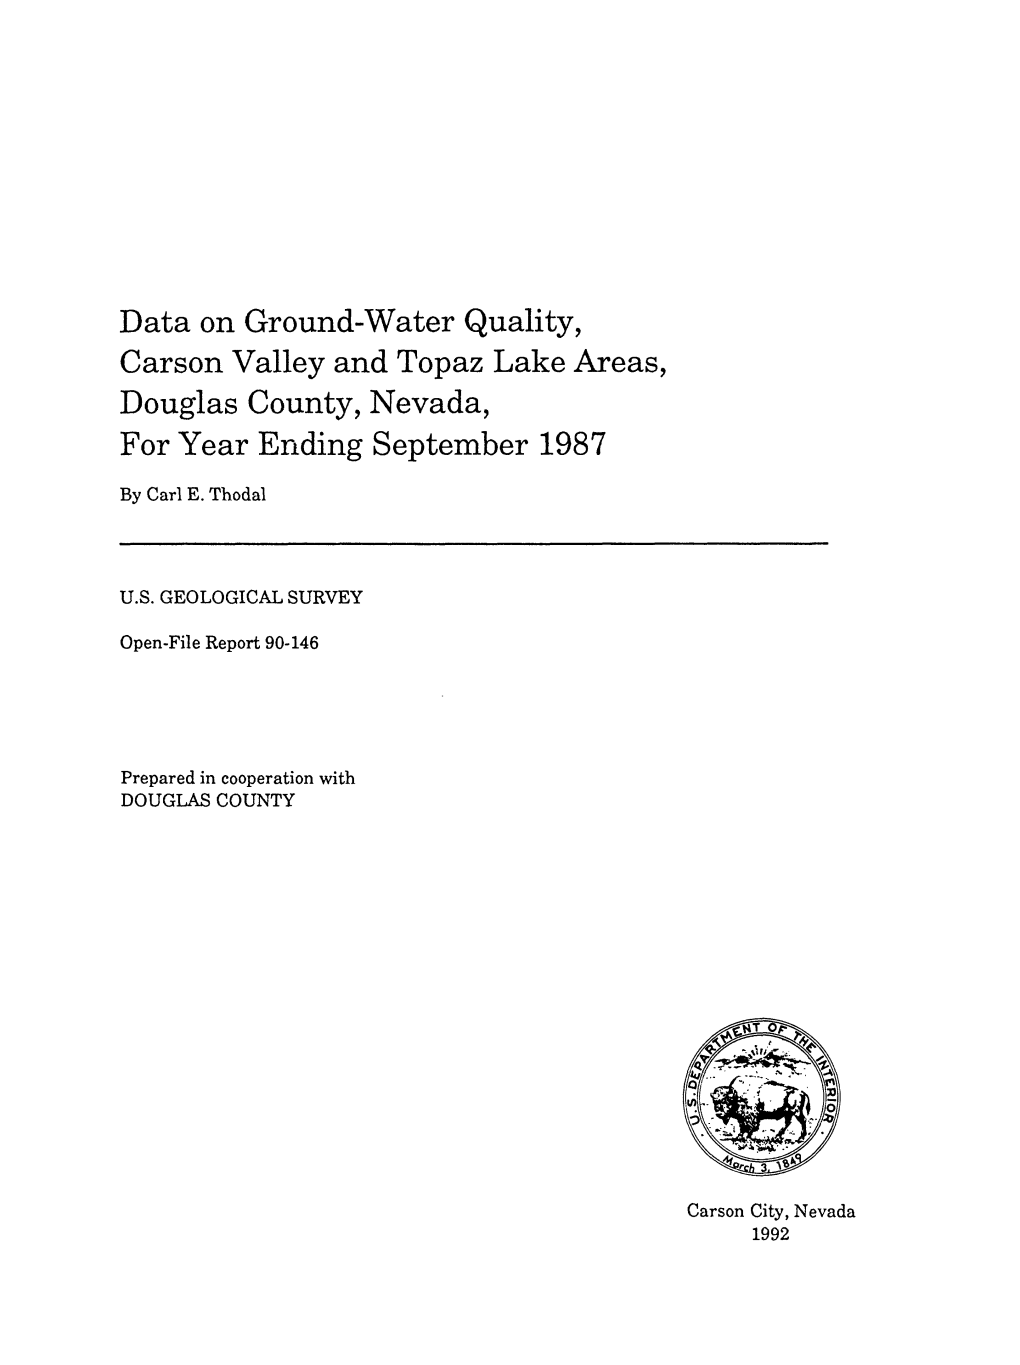 Data on Ground-Water Quality, Carson Valley and Topaz Lake Areas, Douglas County, Nevada, for Year Ending September 1987